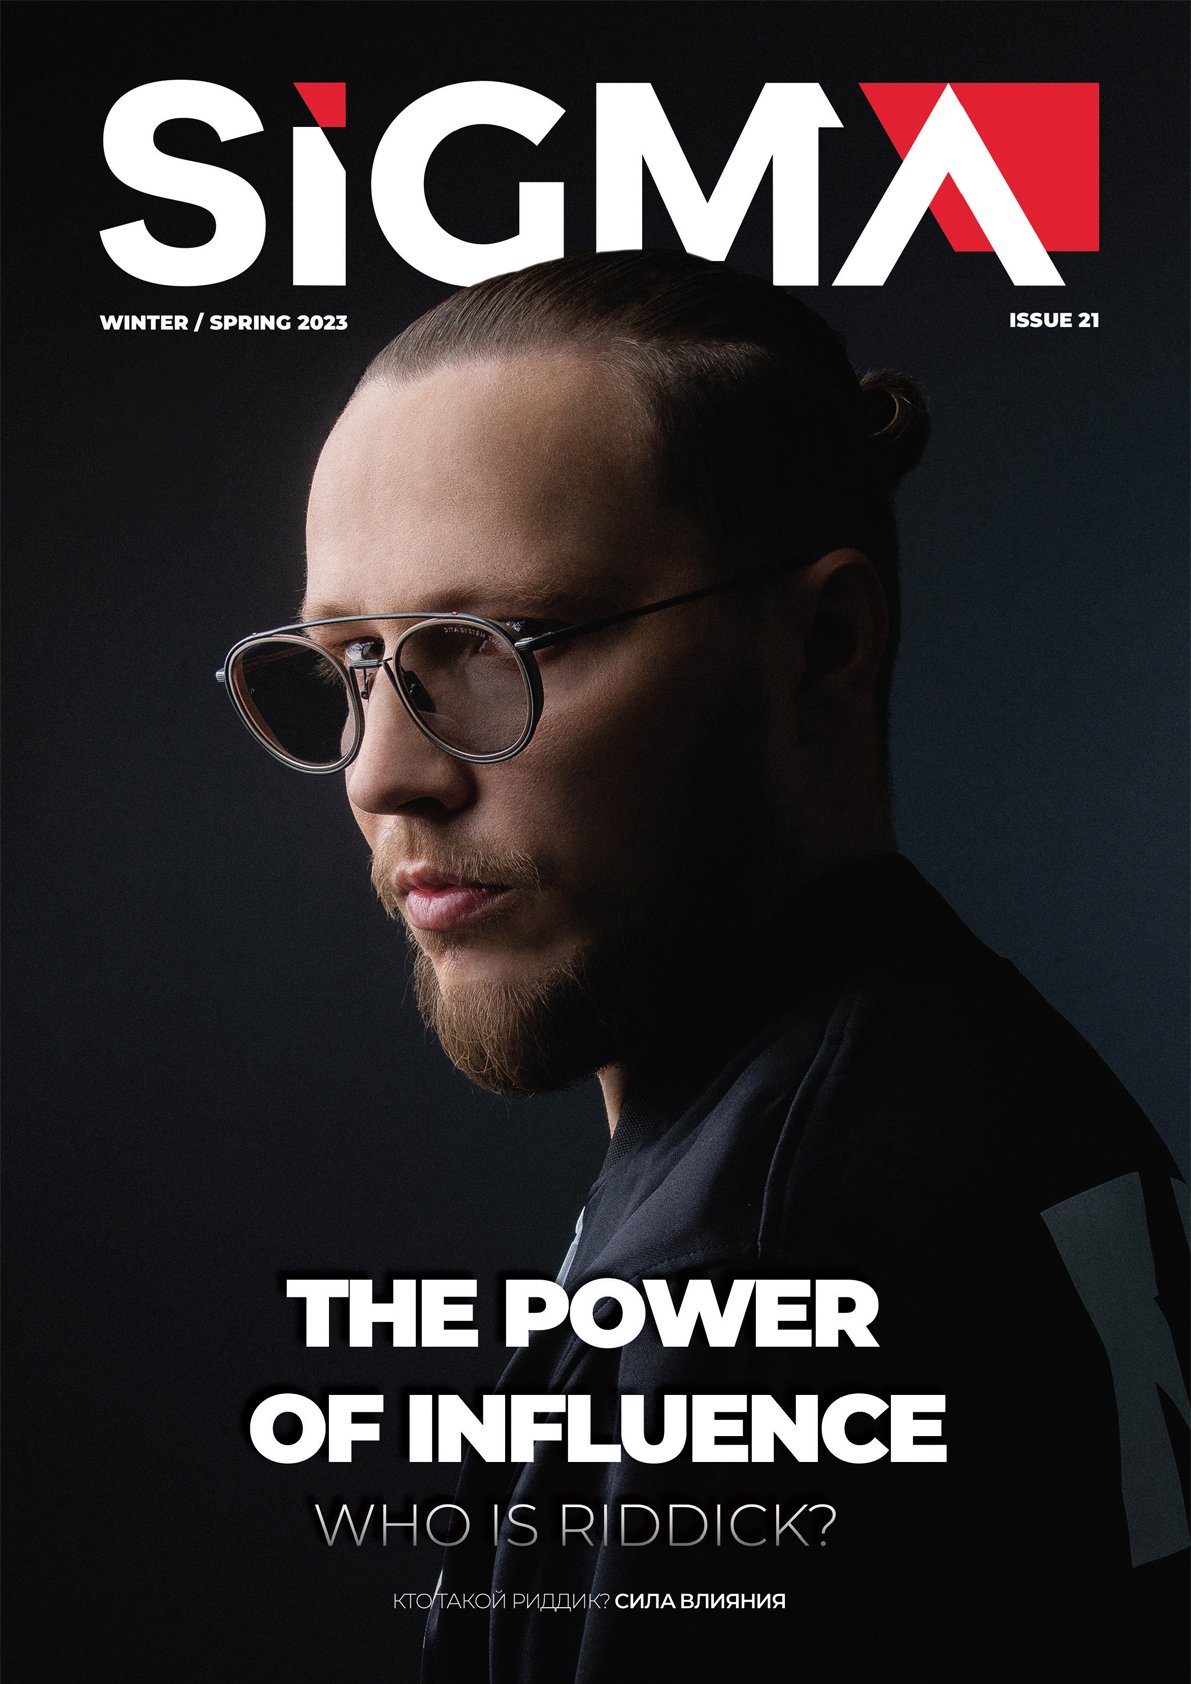 SiGMA Issue 21: The power of influence